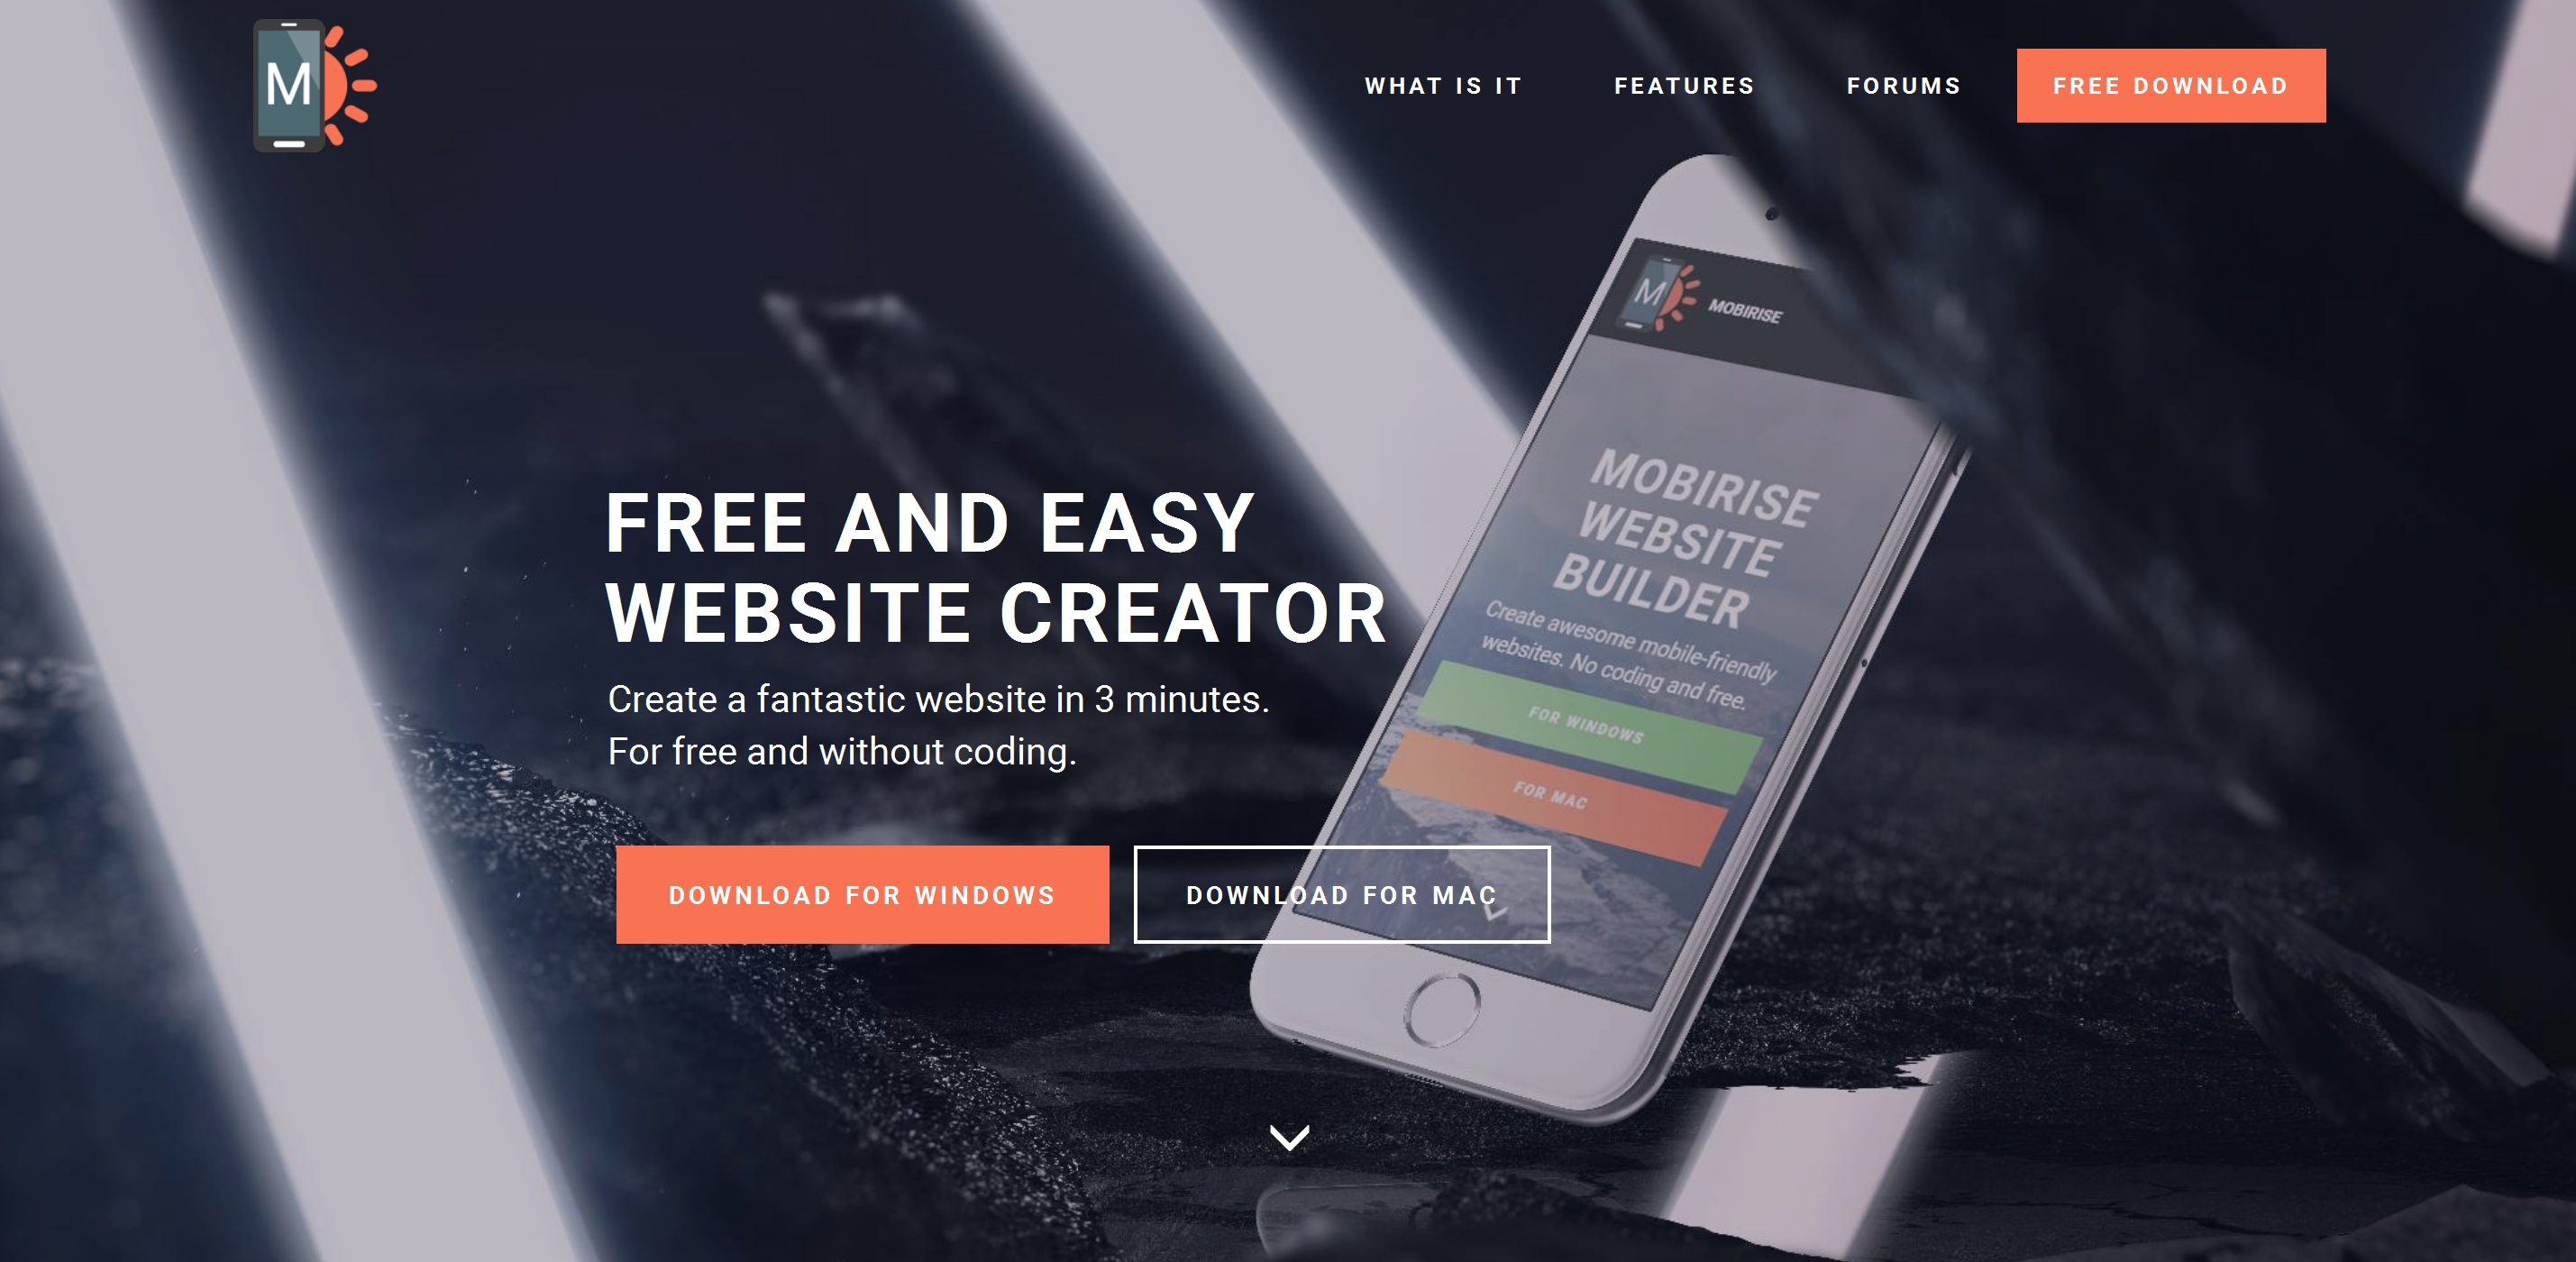  Mobile Web Page  Creator Review